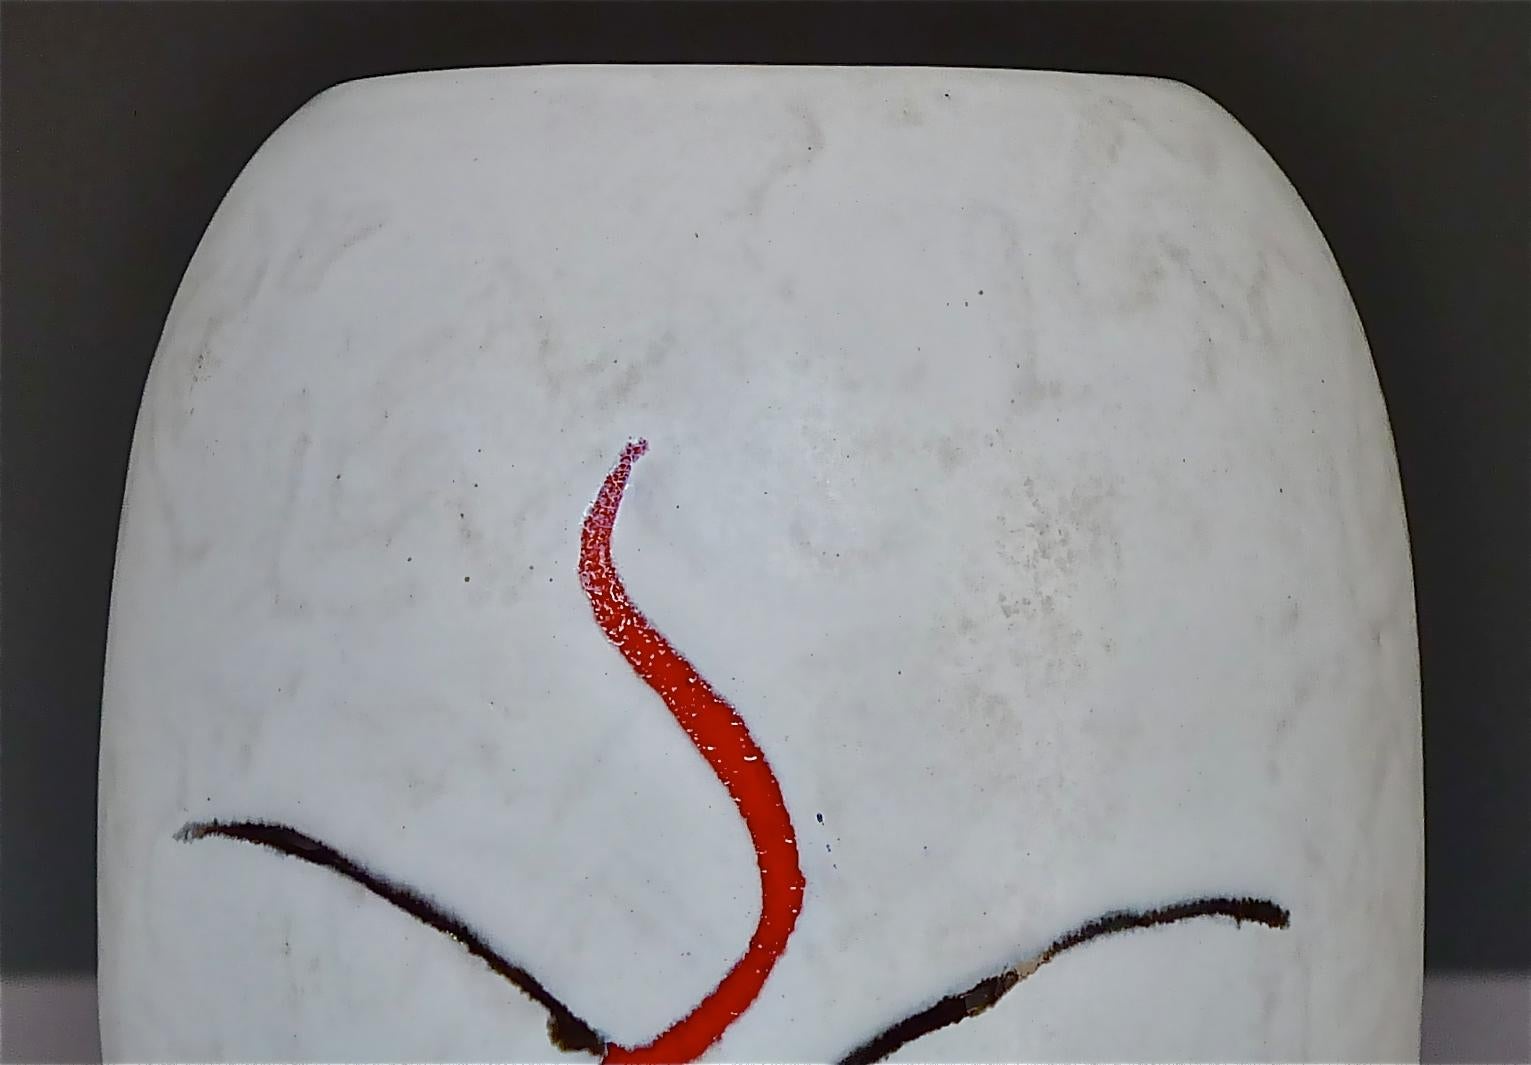 Italian Abstract Midcentury Art Ceramic Vase and Bowl Gambone Miro Style White Red 1950s For Sale